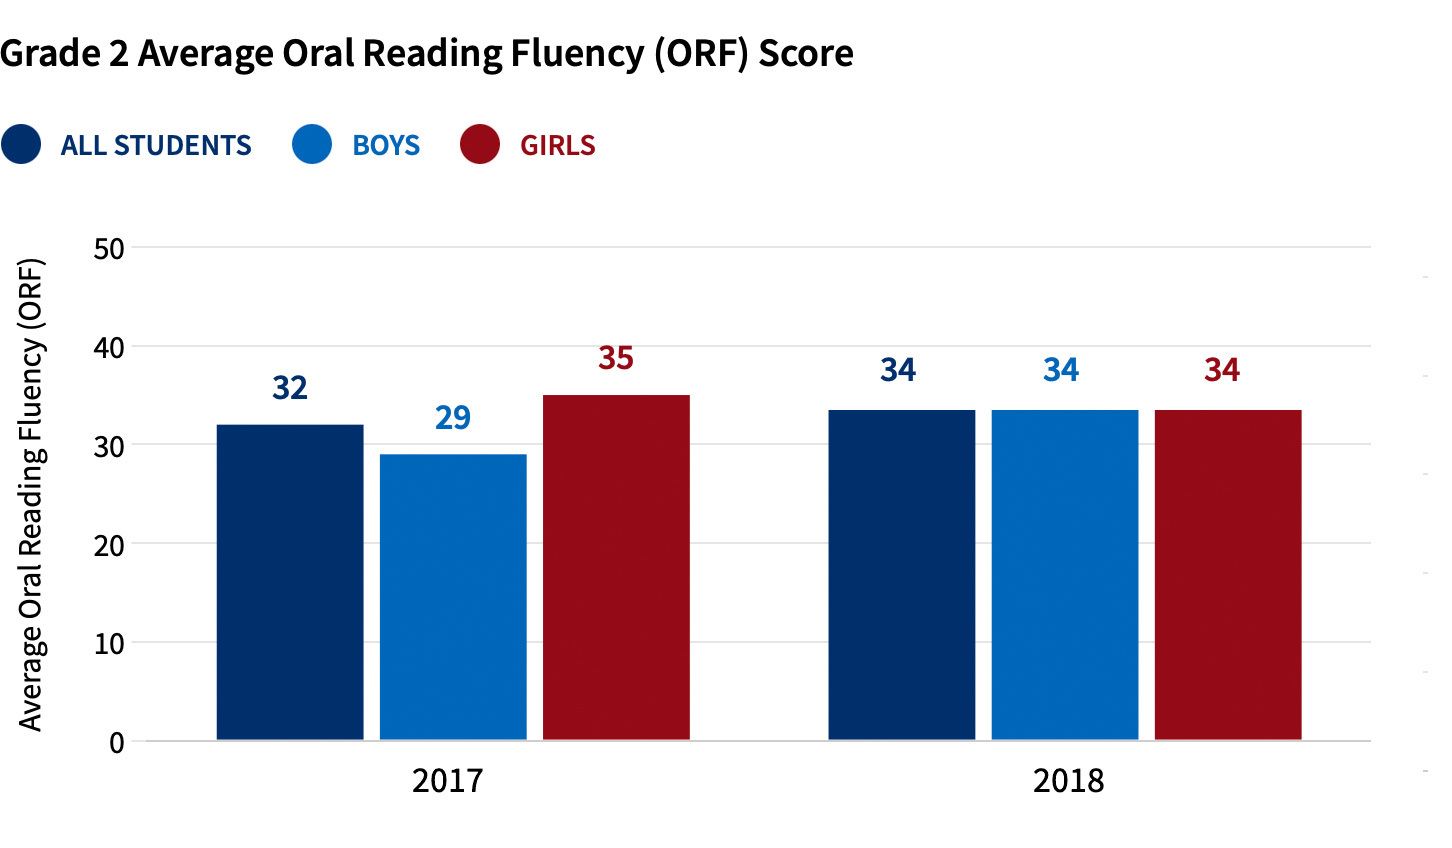 Bar chart showing average oral reading fluency for boys and girls in grade 2 for years 2017 and 2018.